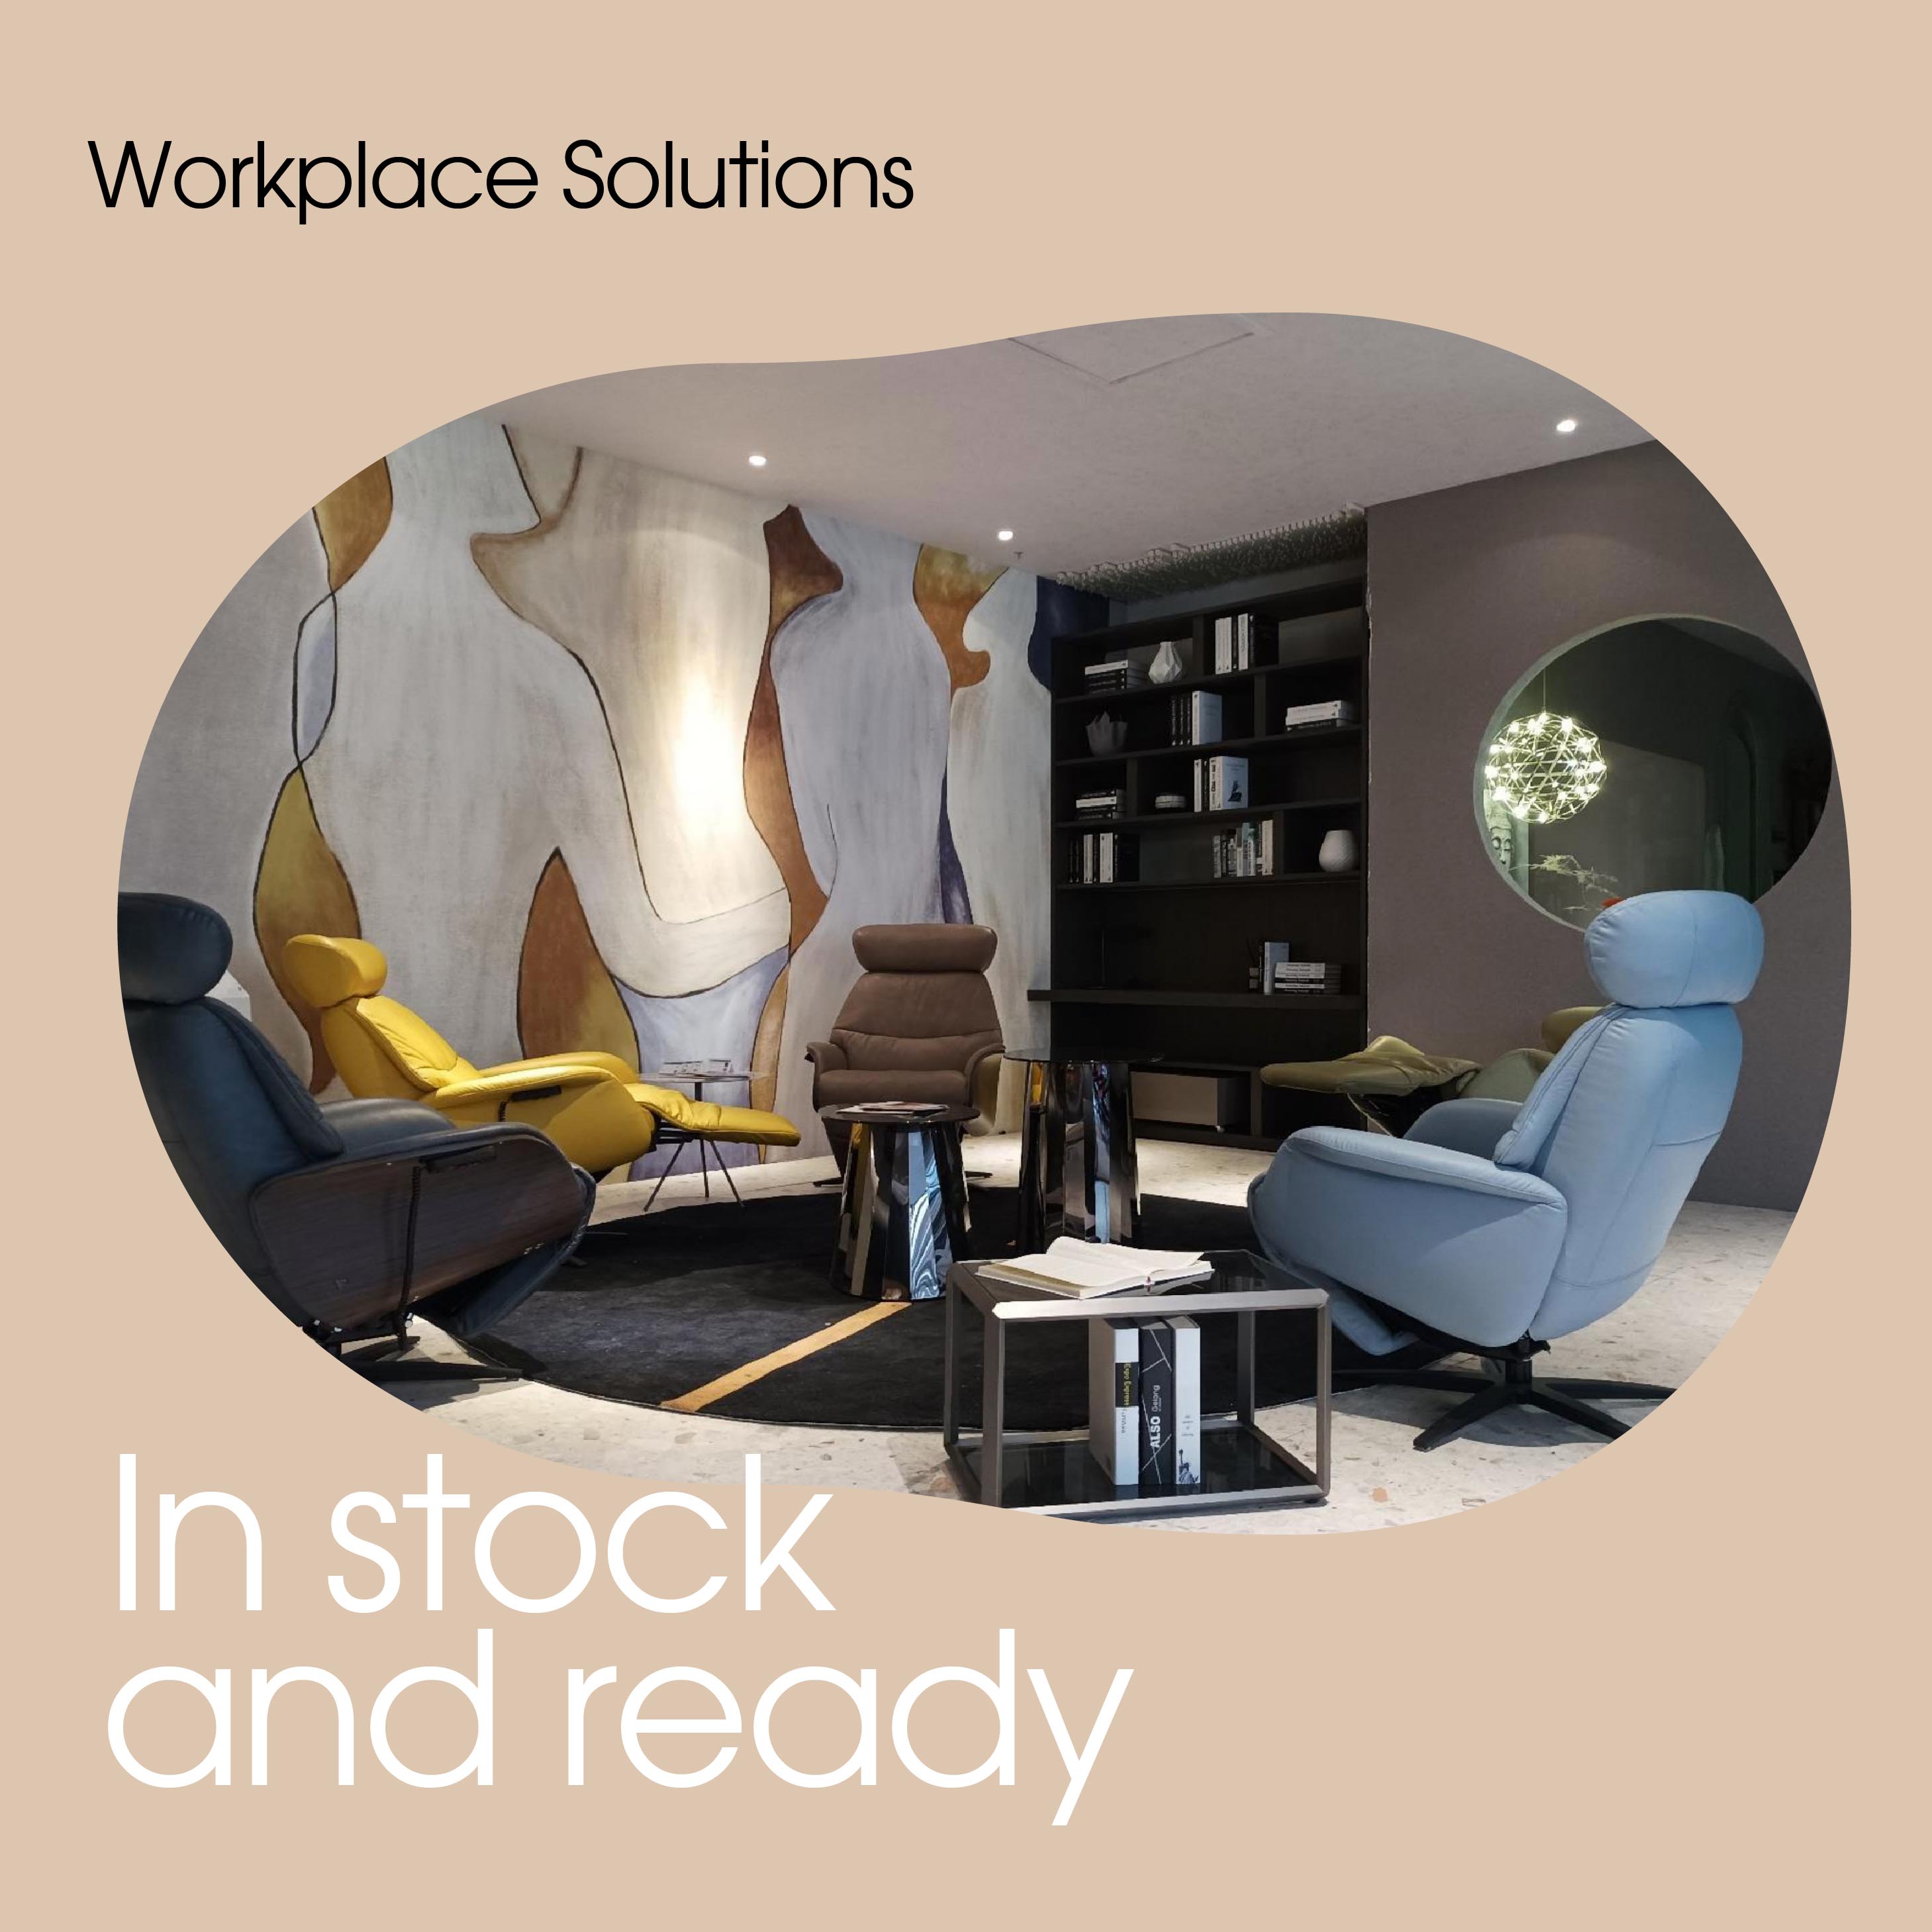 WORKPLACE SOLUTIONS | IN STOCK AND READY